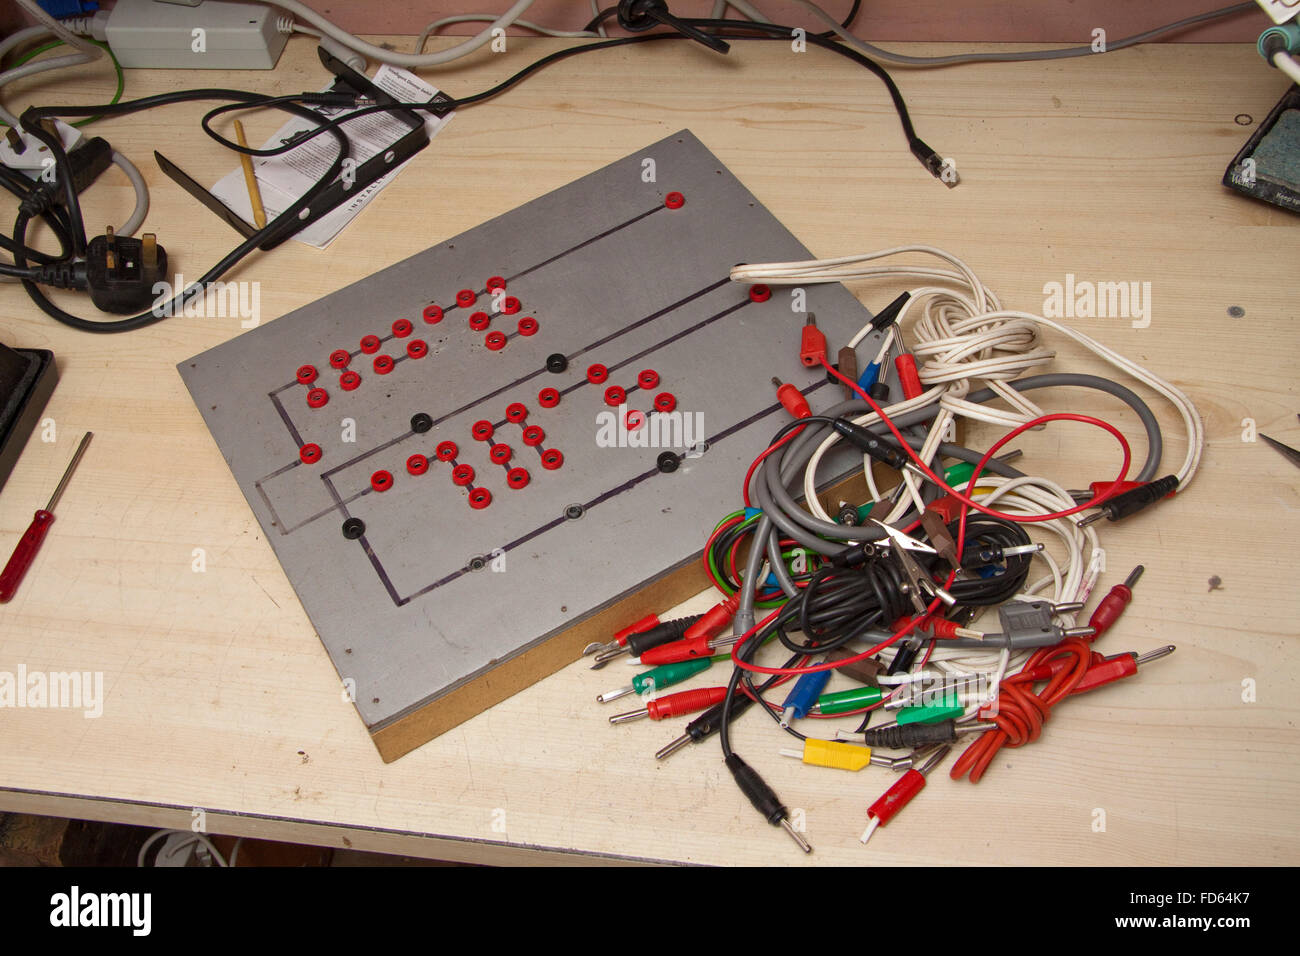 A patch board for assembling electrical components to test a loudspeaker crossover. Stock Photo